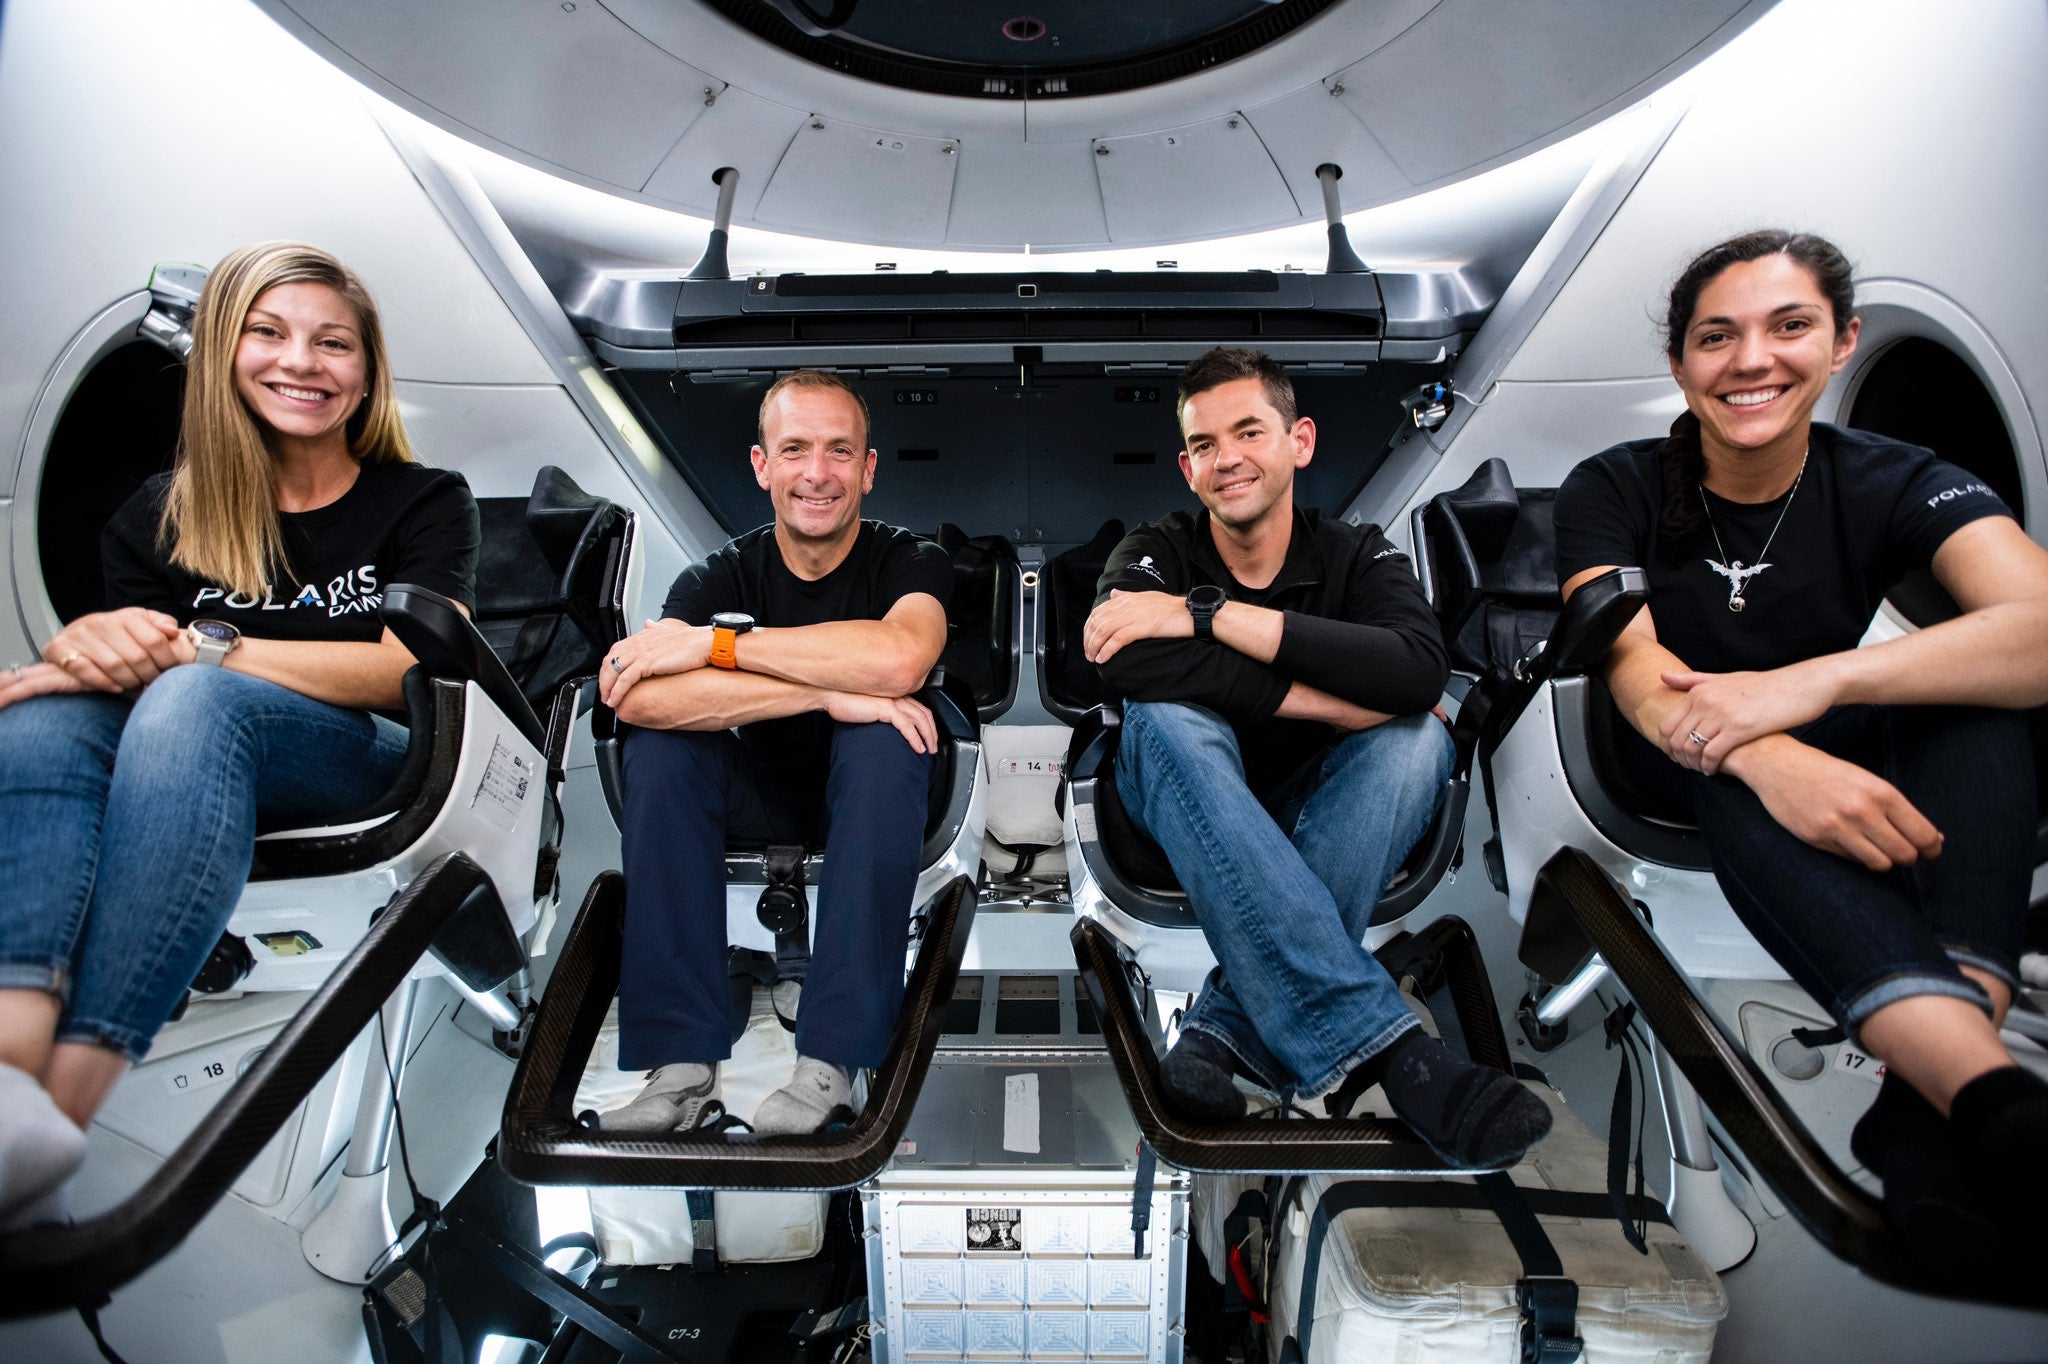 Polaris Program announces science research crew will conduct aboard SpaceX Dragon as it continues training for the first commercial spacewalk